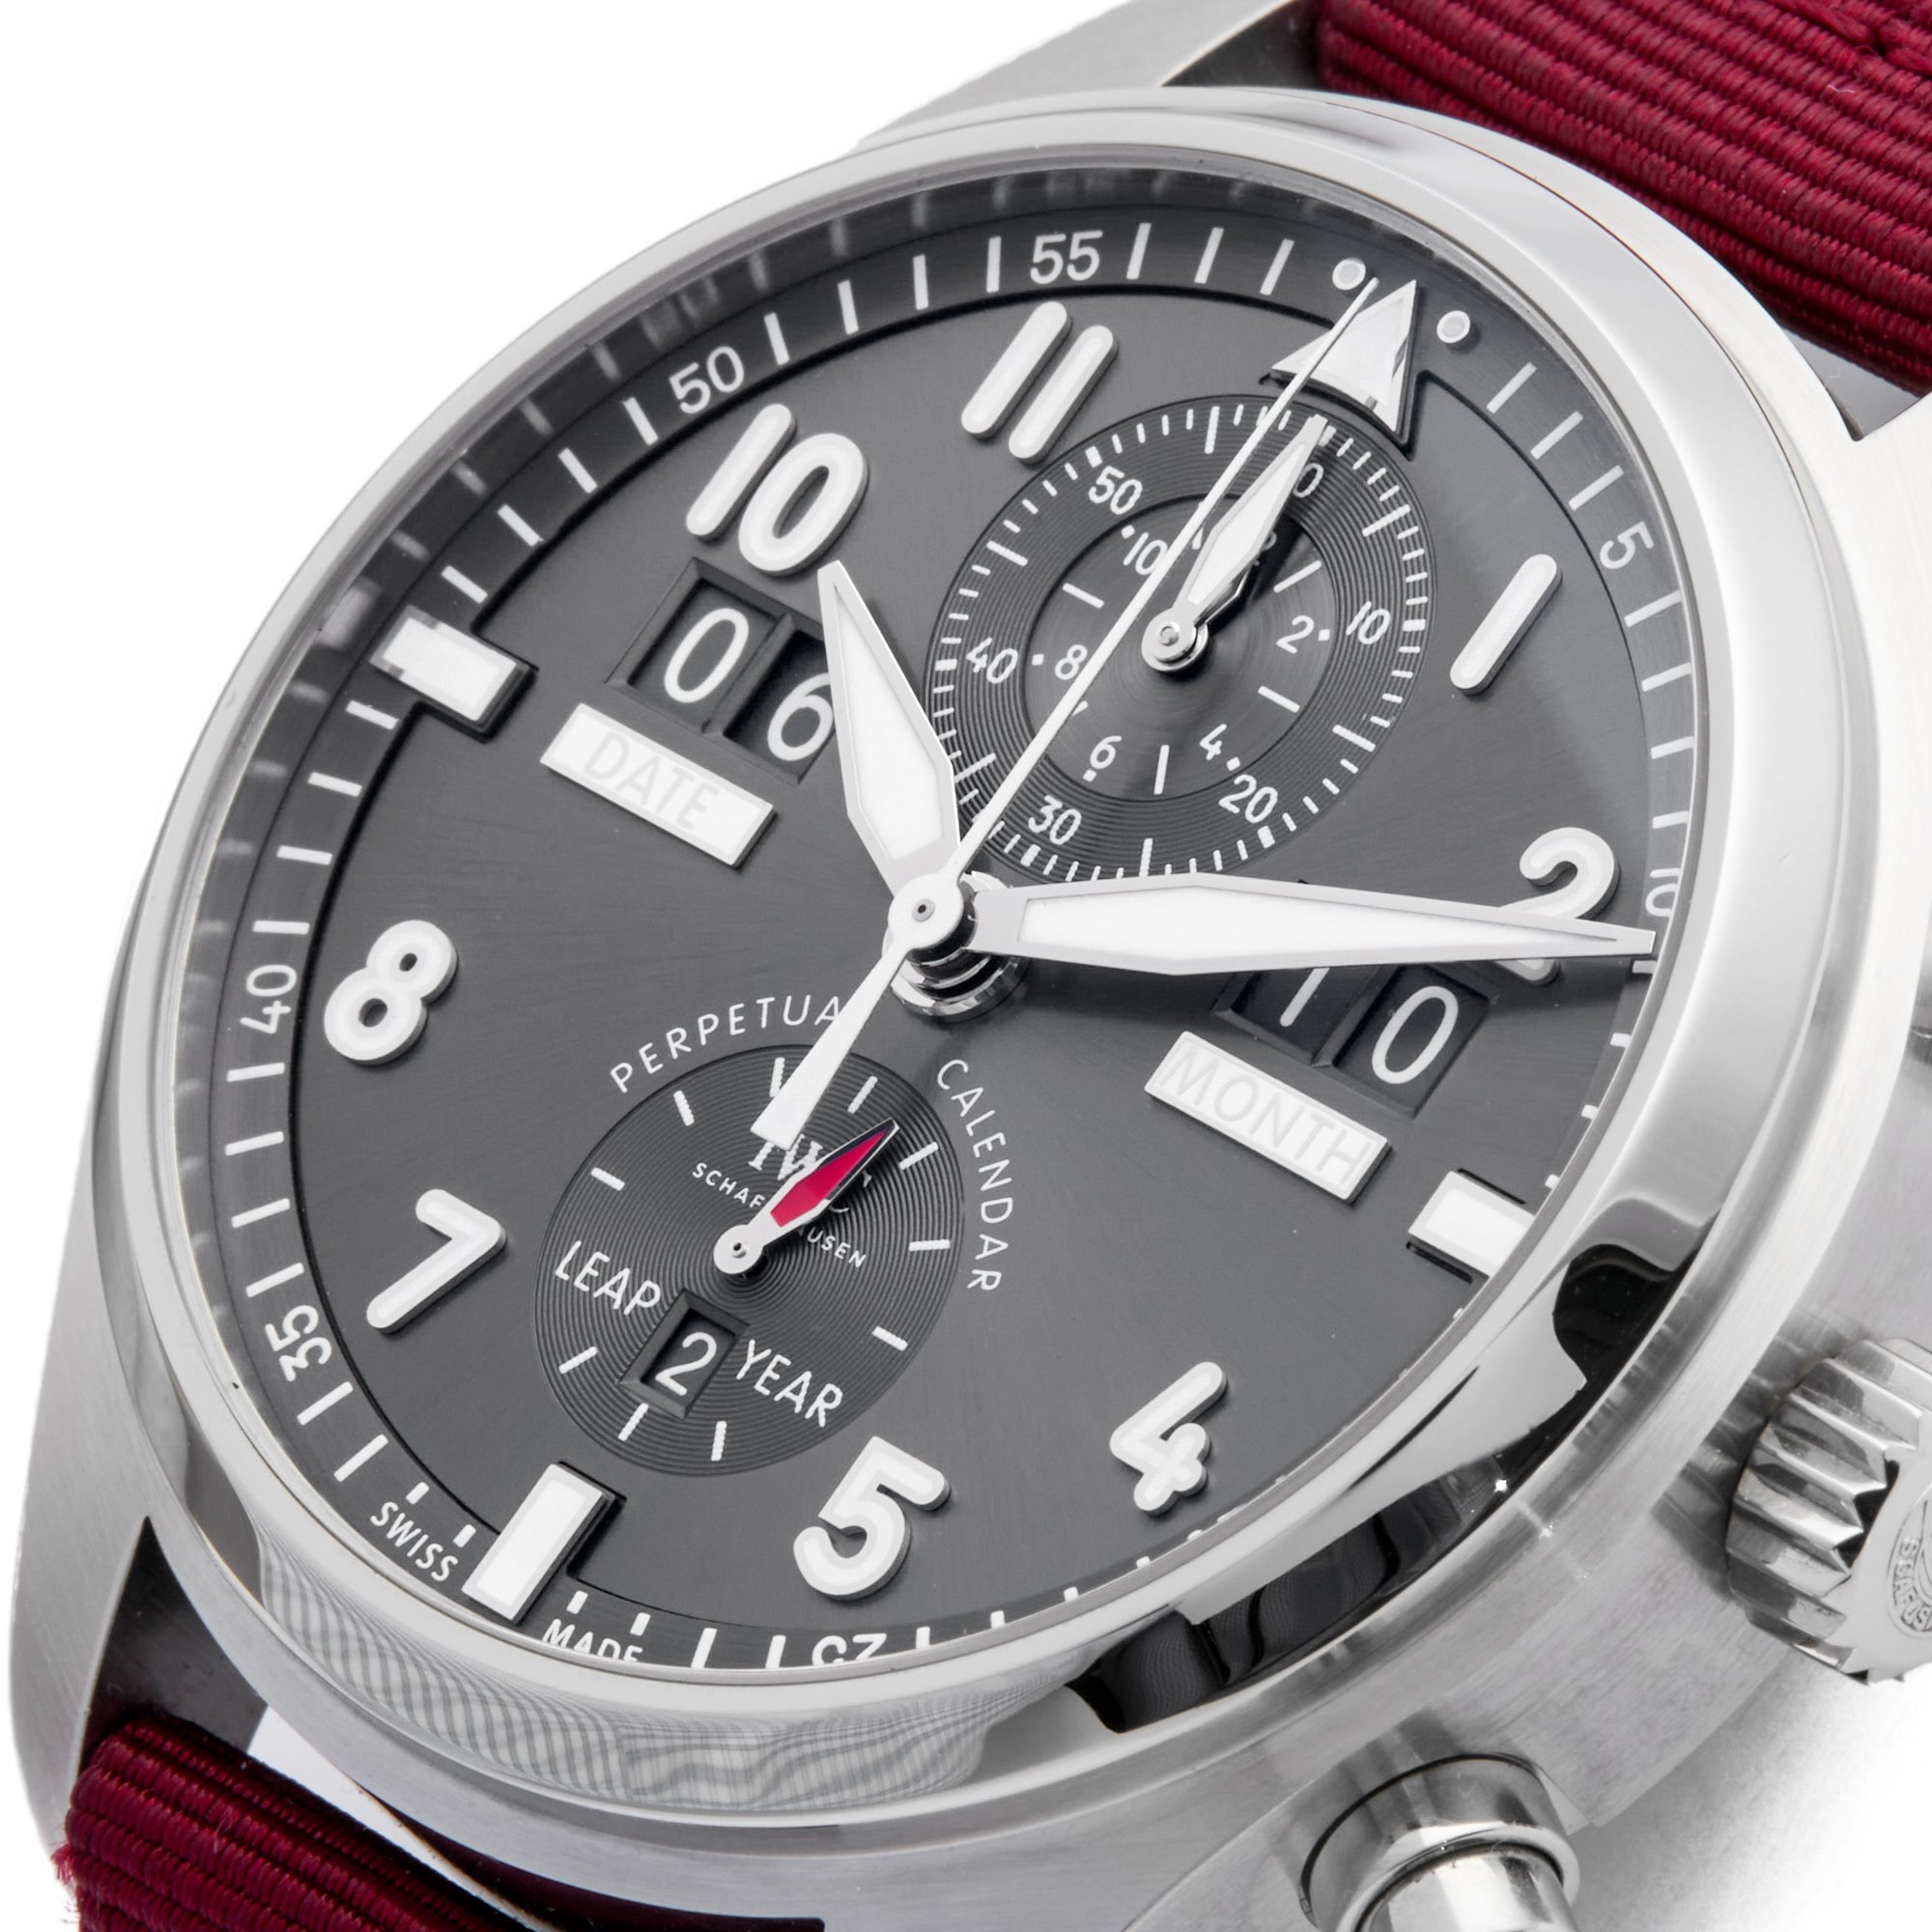 IWC Spitfire Perpetual Calendar Stainless Steel IW379108